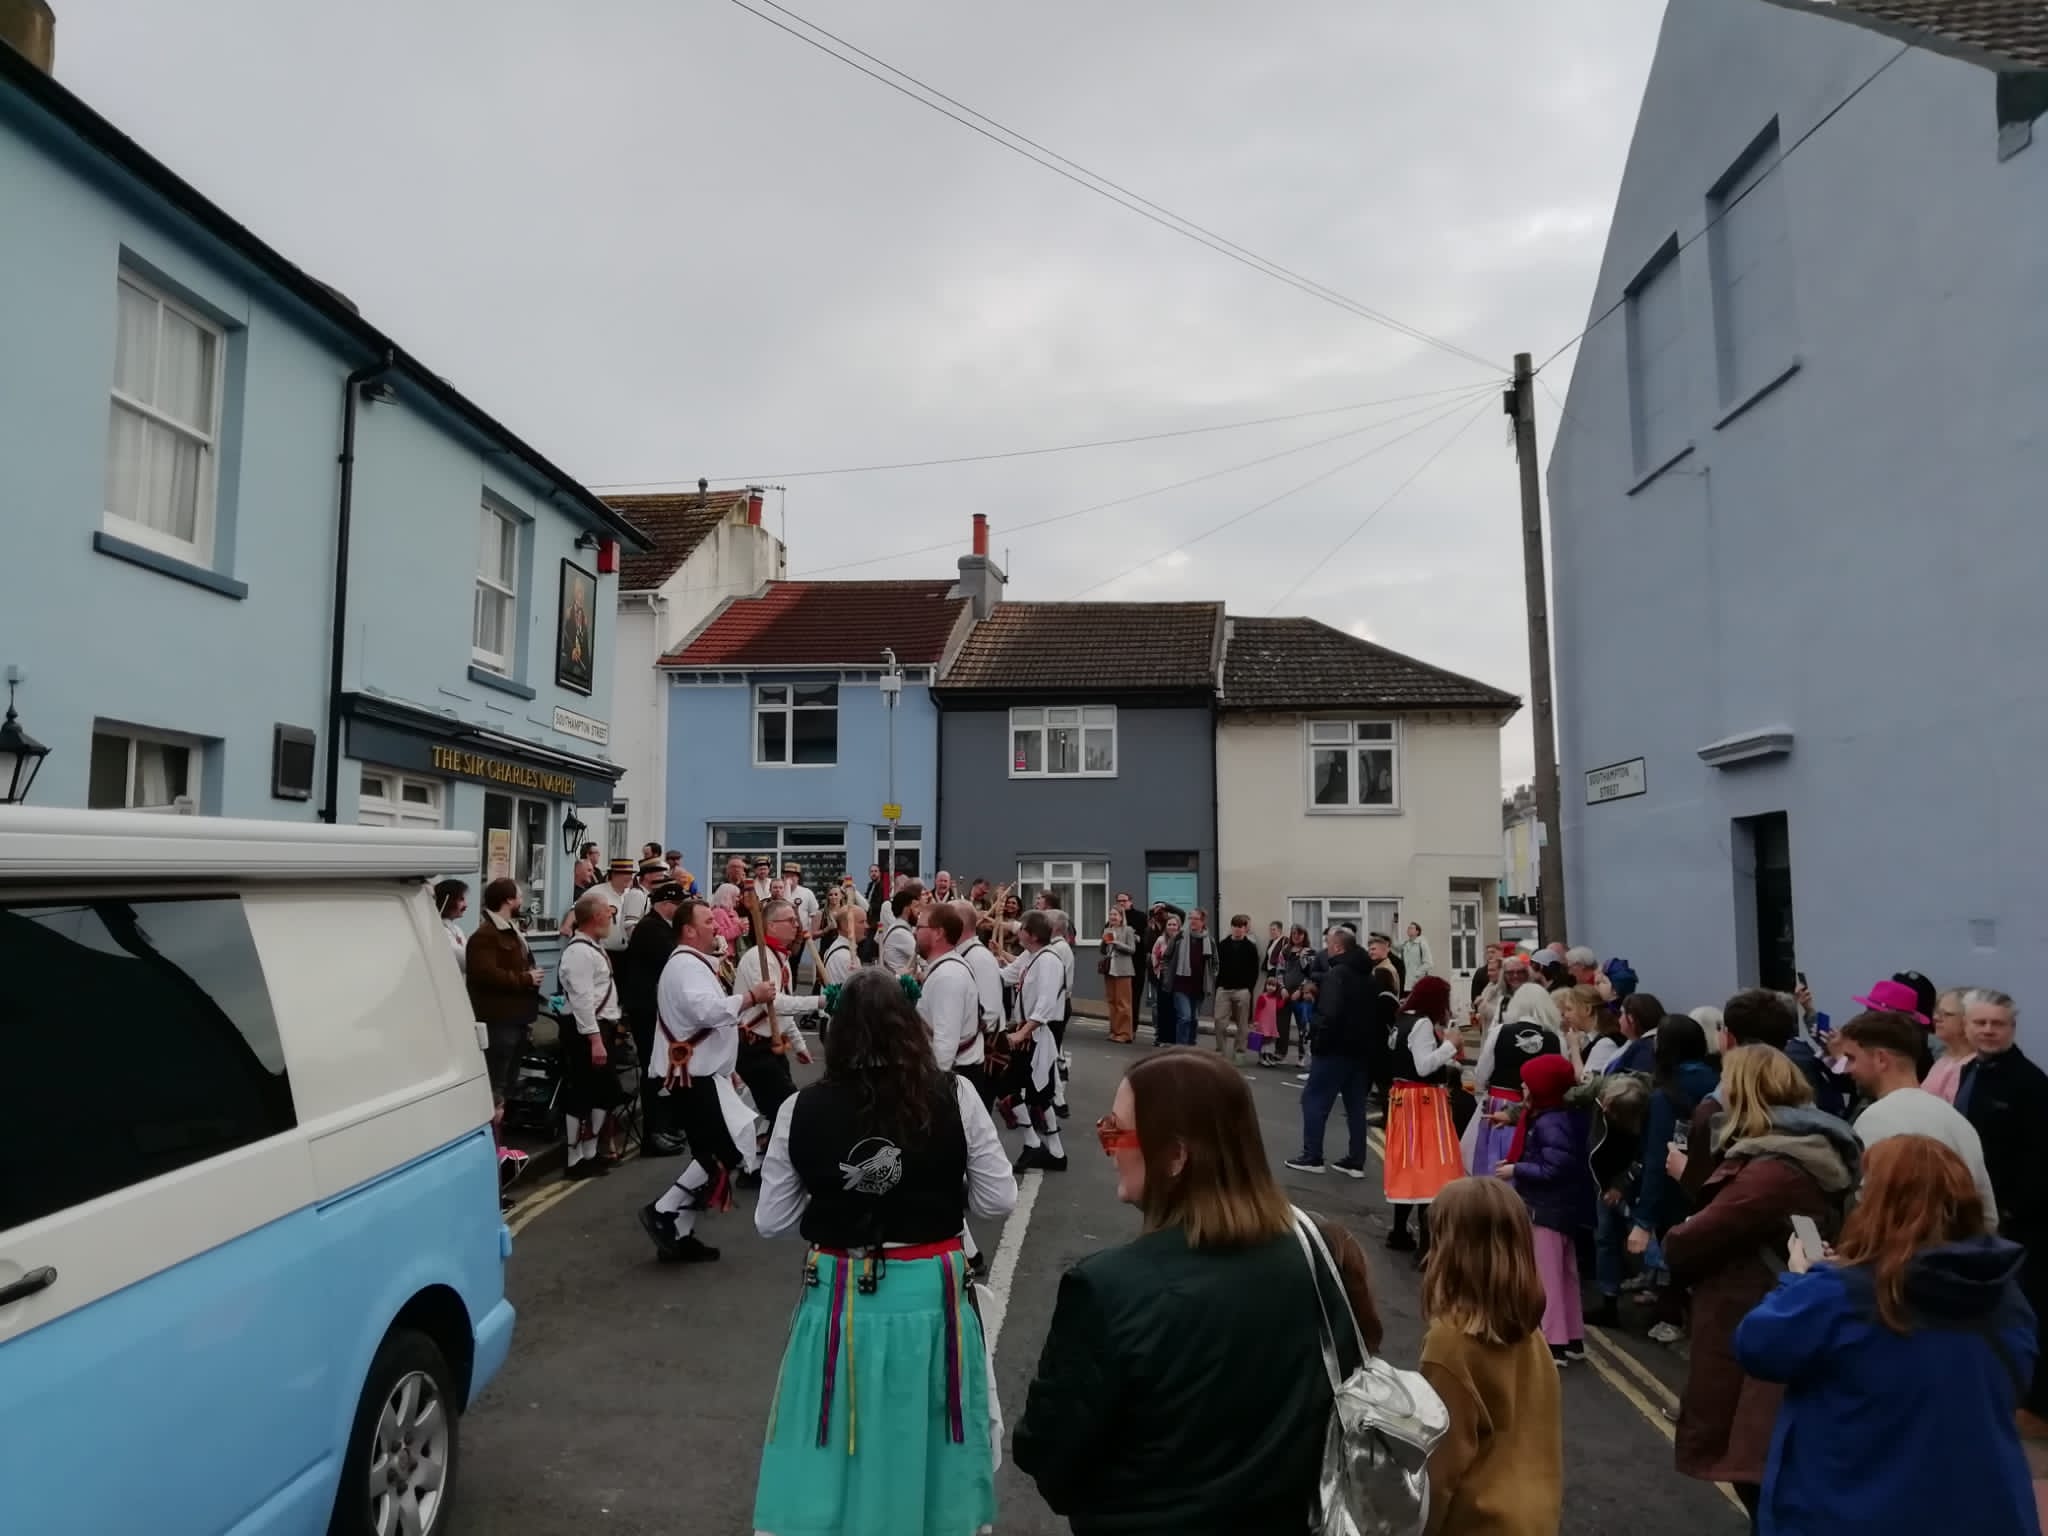 Two sides up for a Bledington stick dance. The Sir Charles Napier, 30th April May Eve.